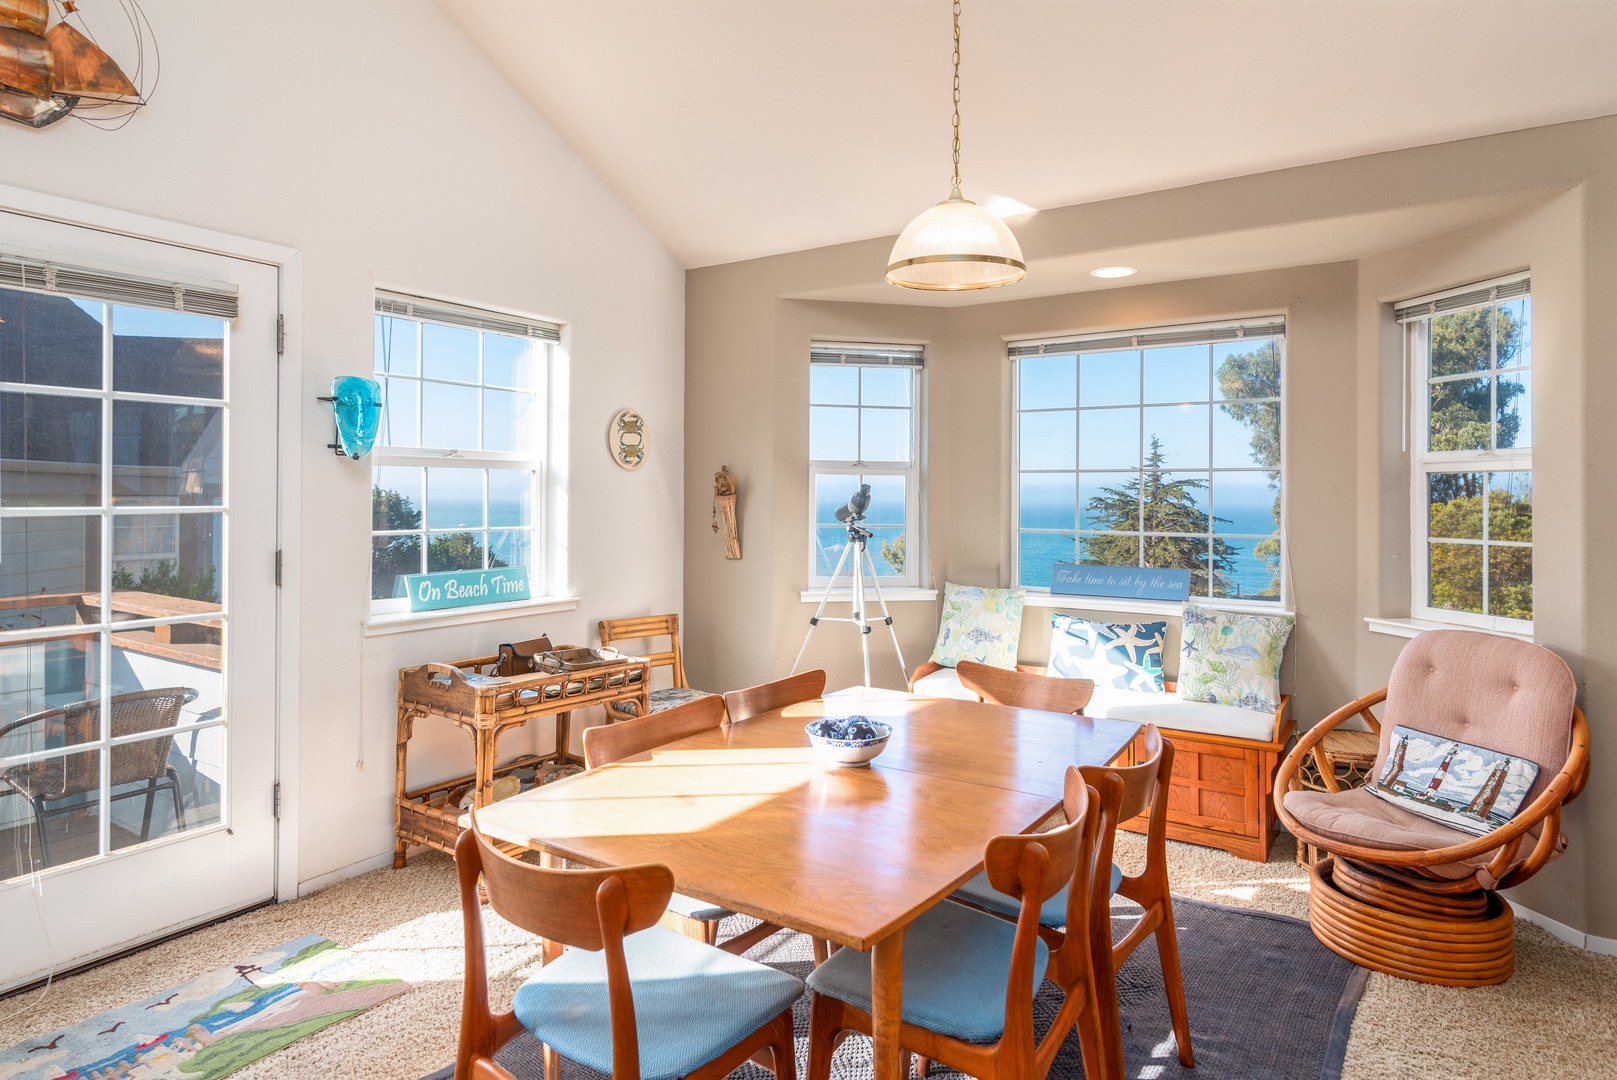 Dining table for 6 with ocean view